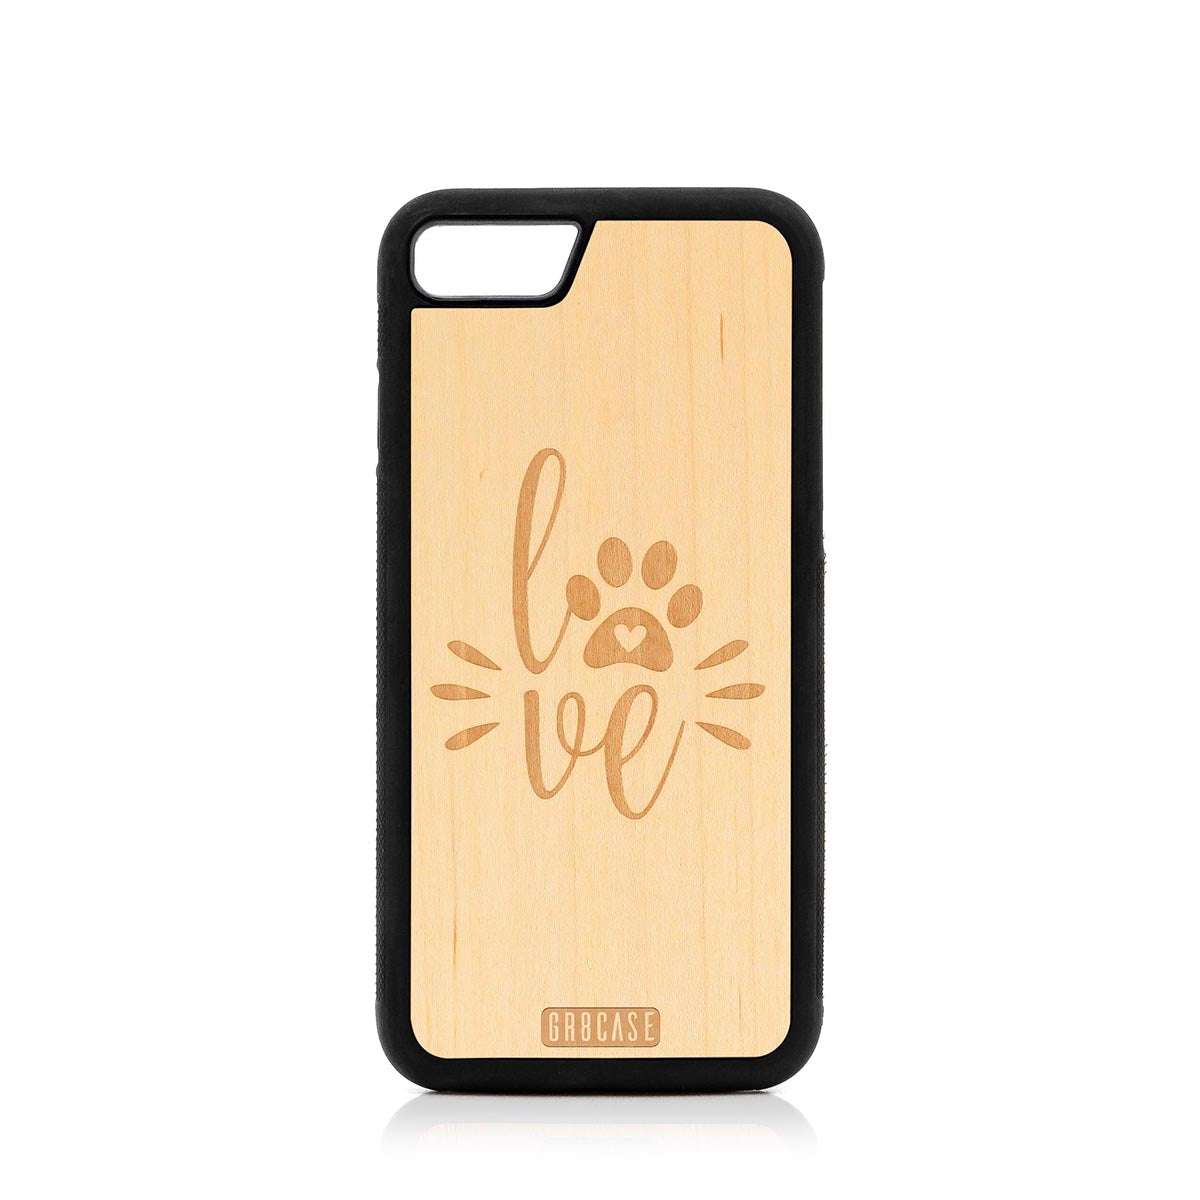 Paw Love Design Wood Case For iPhone 7/8 by GR8CASE